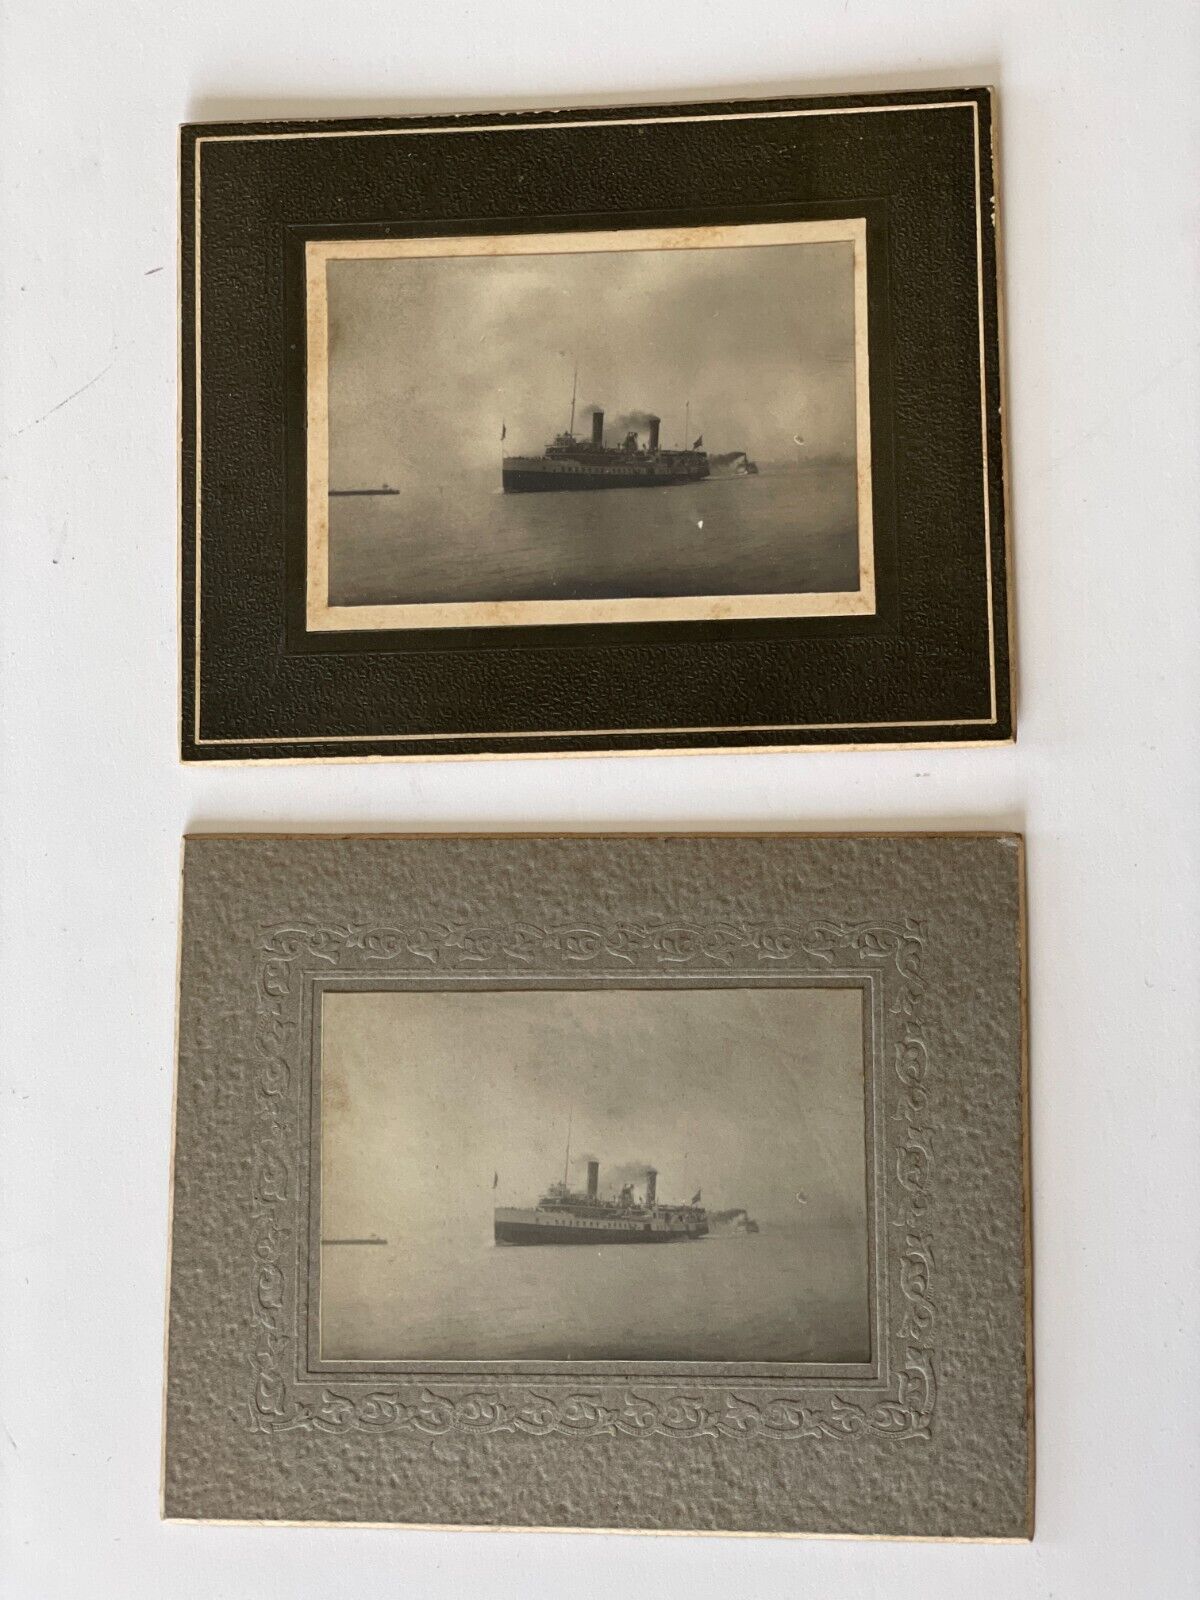 A unique pair of old ship's maritime photos, a rare find of photographer tricks